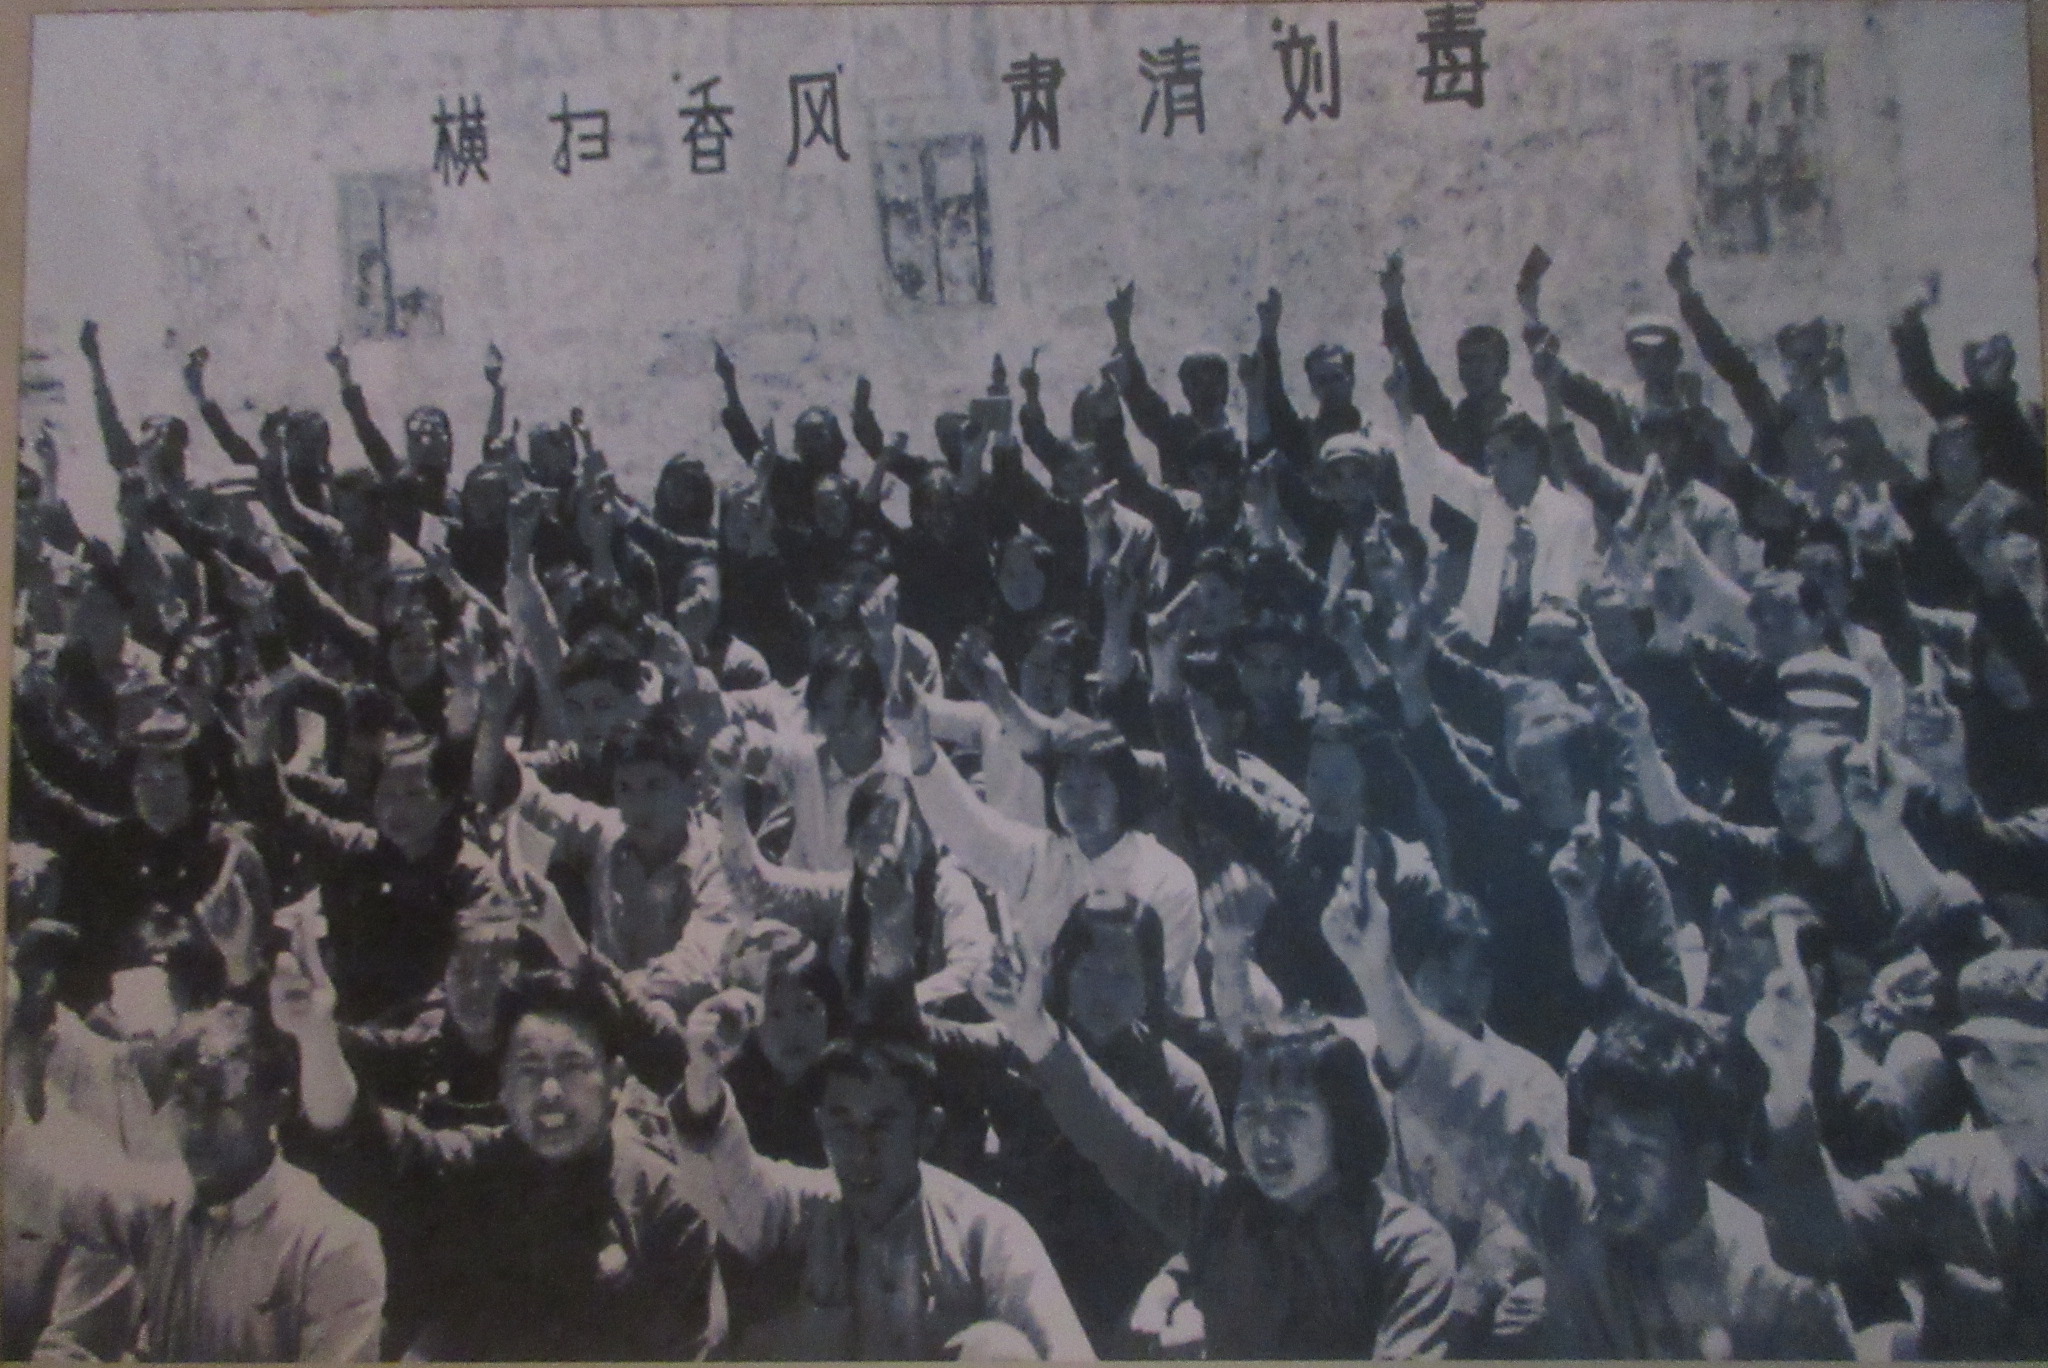 A black and white photo of a group of people raising their hands in China.